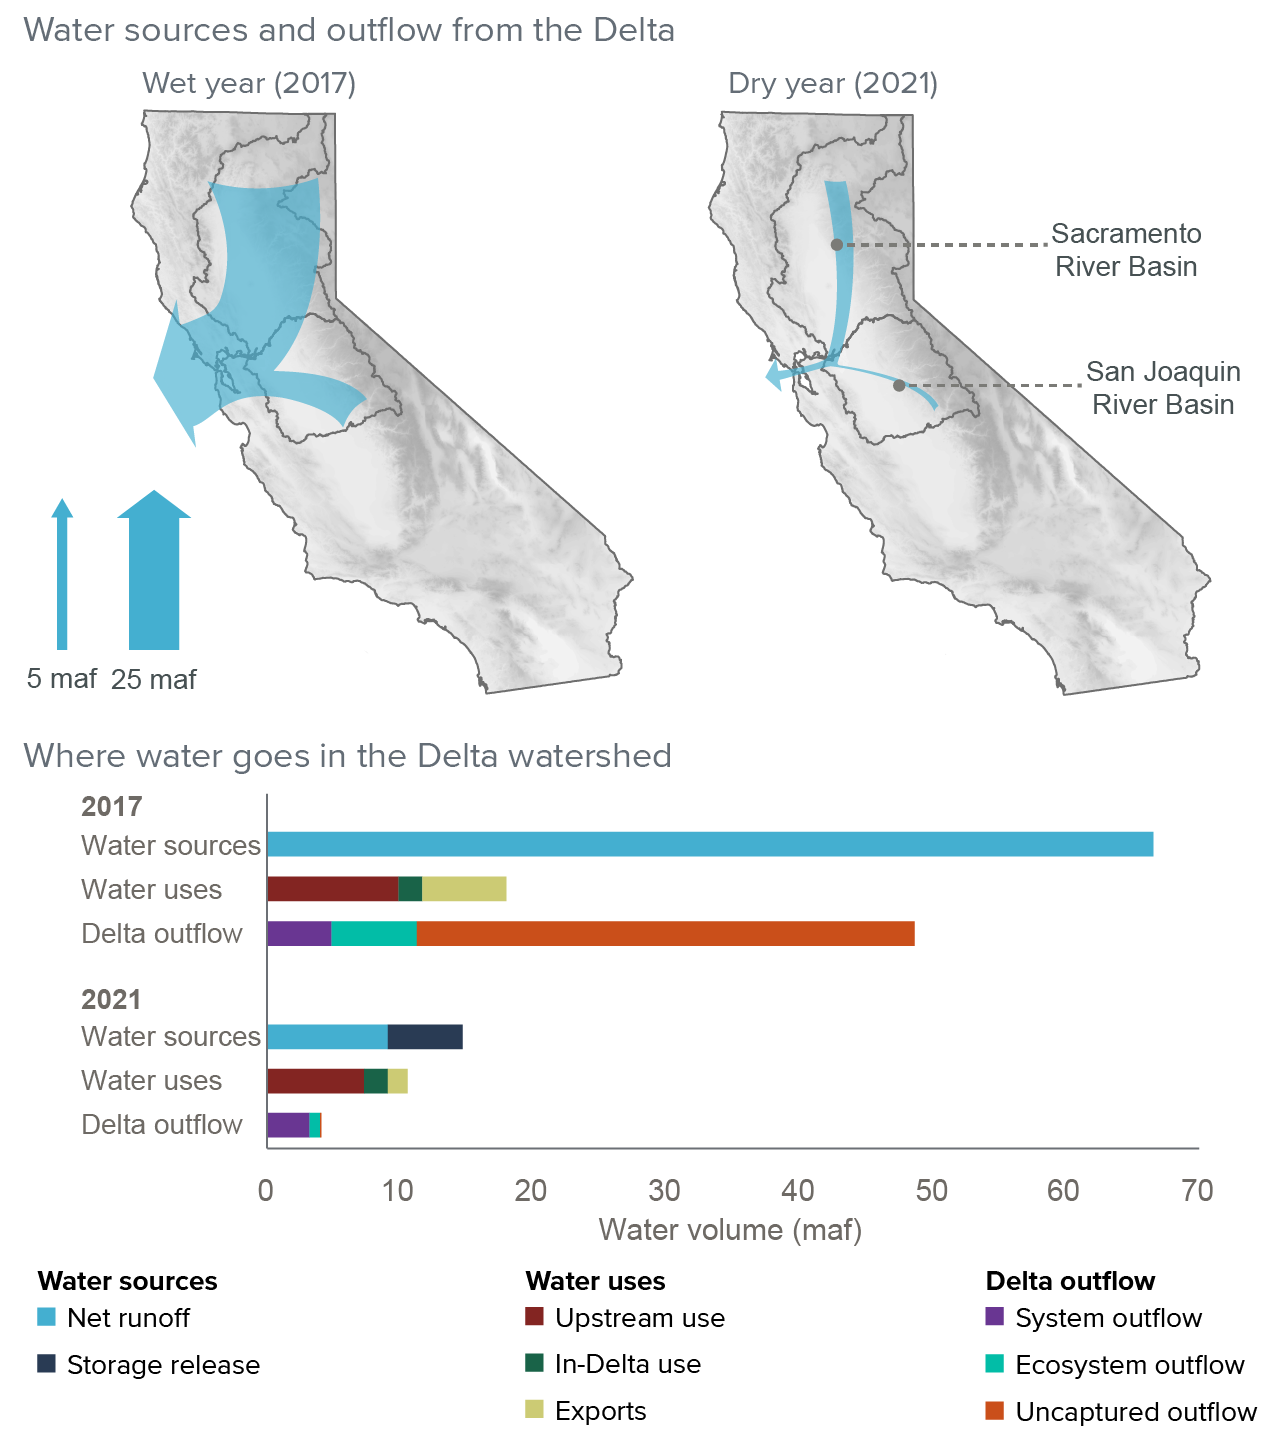 figure - Comparing Delta flows in wet and dry years